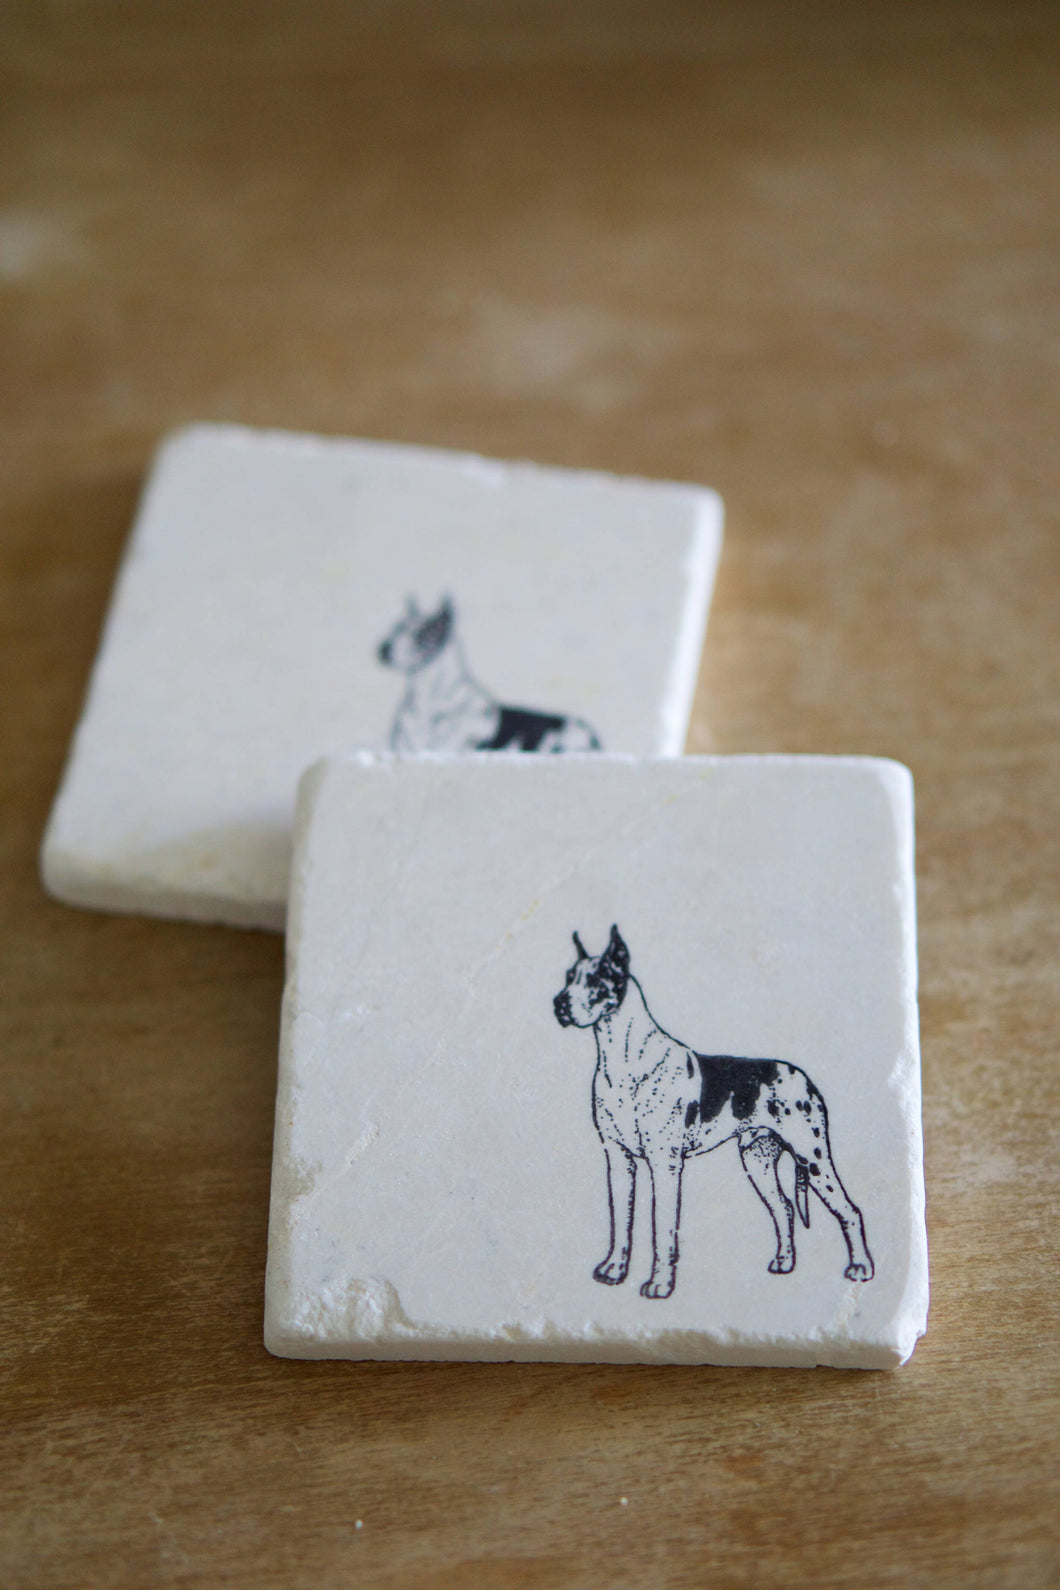 Great Dane Dog Marble Coasters - Lace, Grace & Peonies